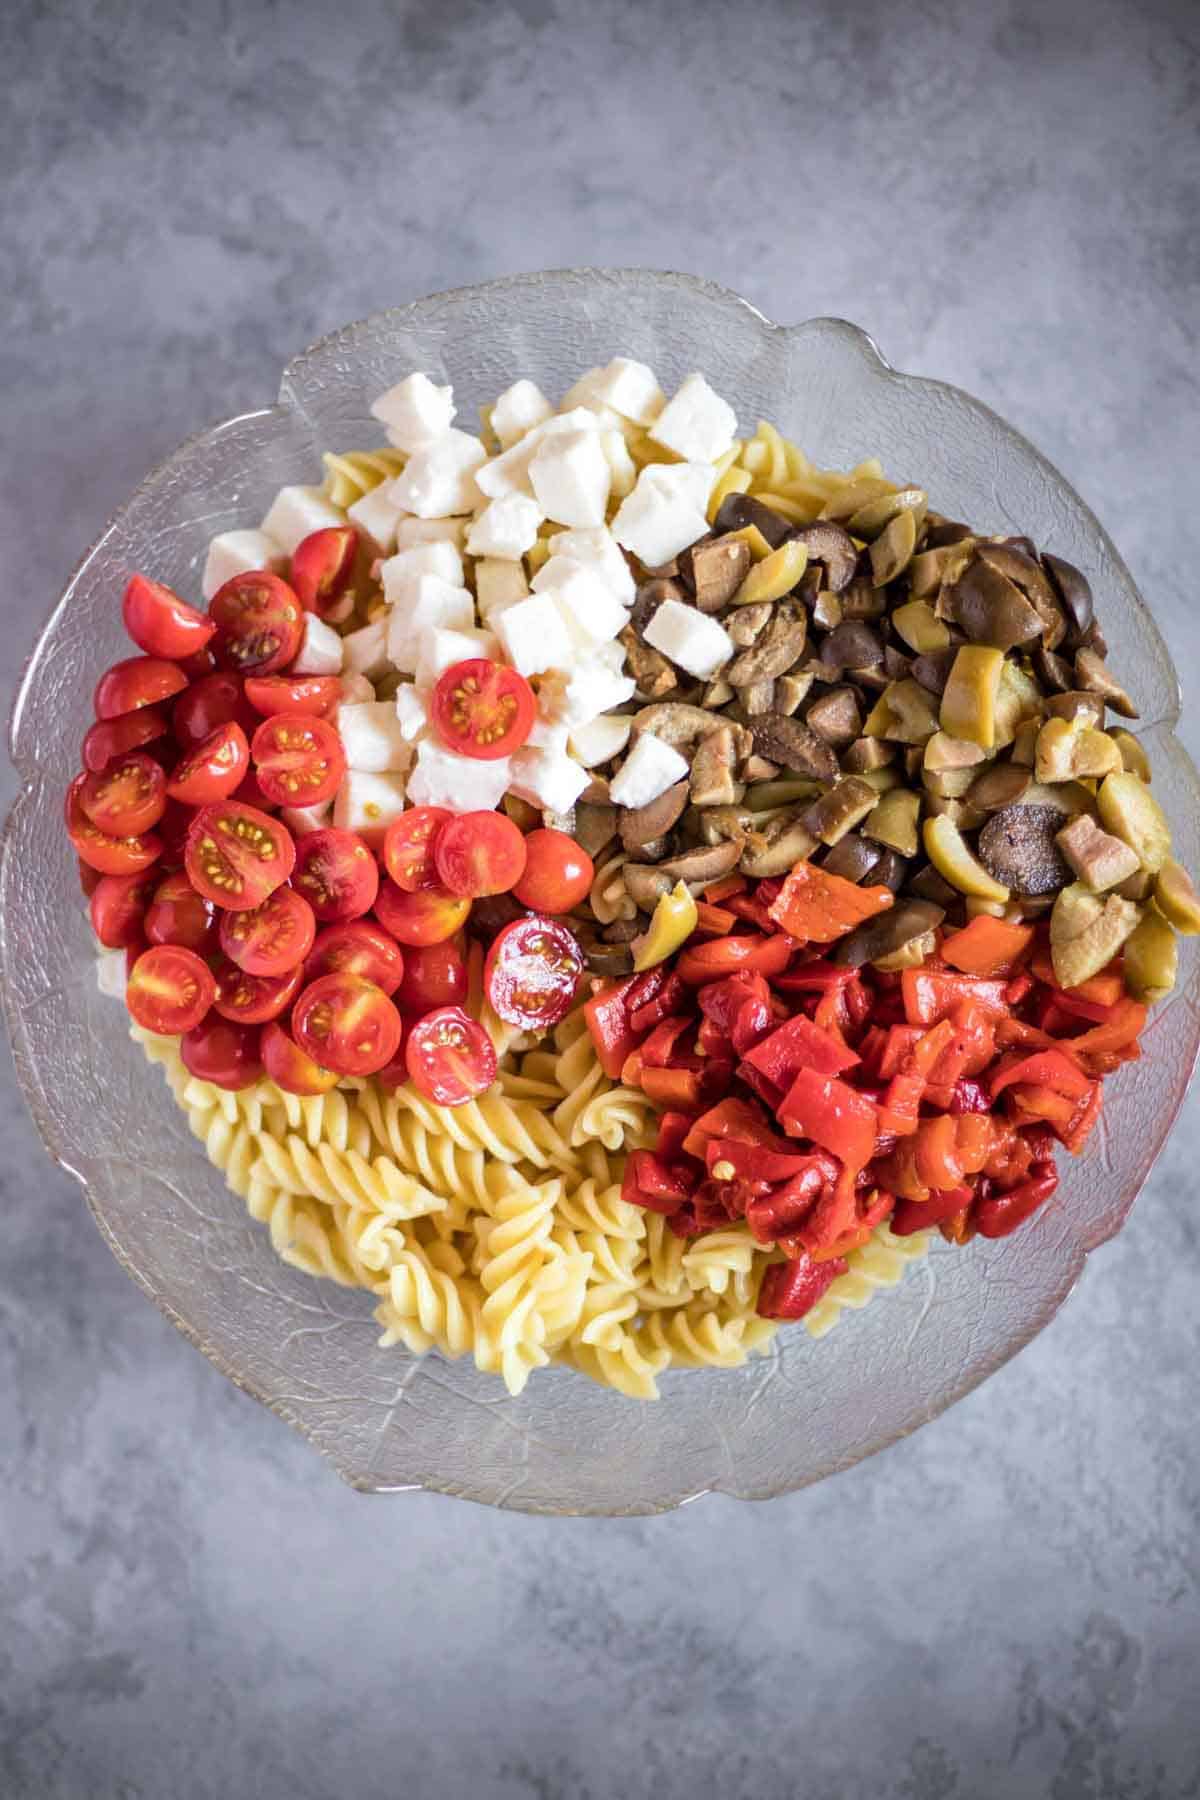 A salad bowl with gluten-free rotini pasta, cherry tomatoes, mozzarella balls, olives and roasted red pepper.